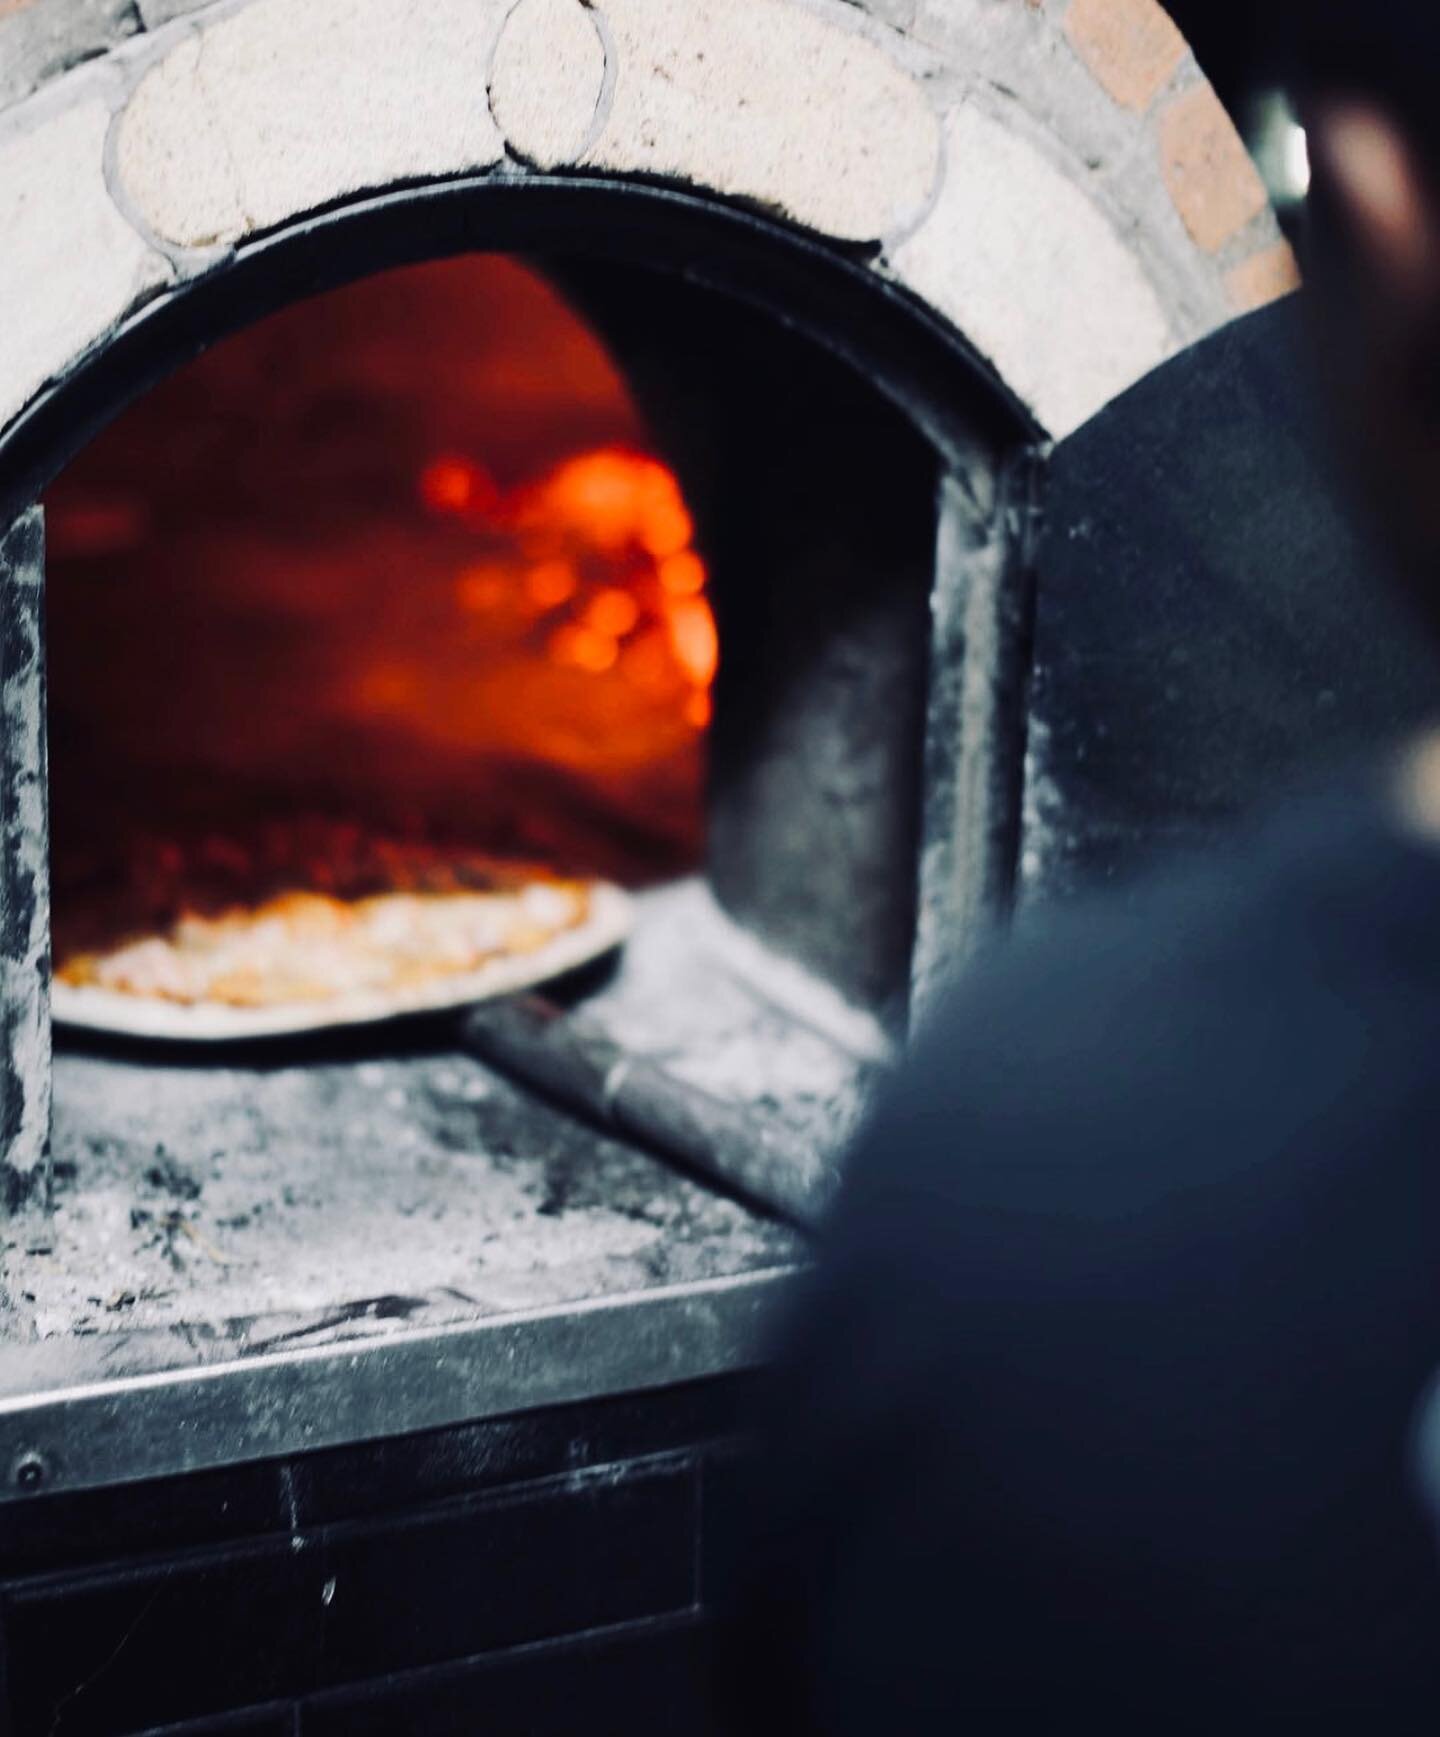 Our pizza oven is back on 🔥 who&rsquo;s hungry? 🍕